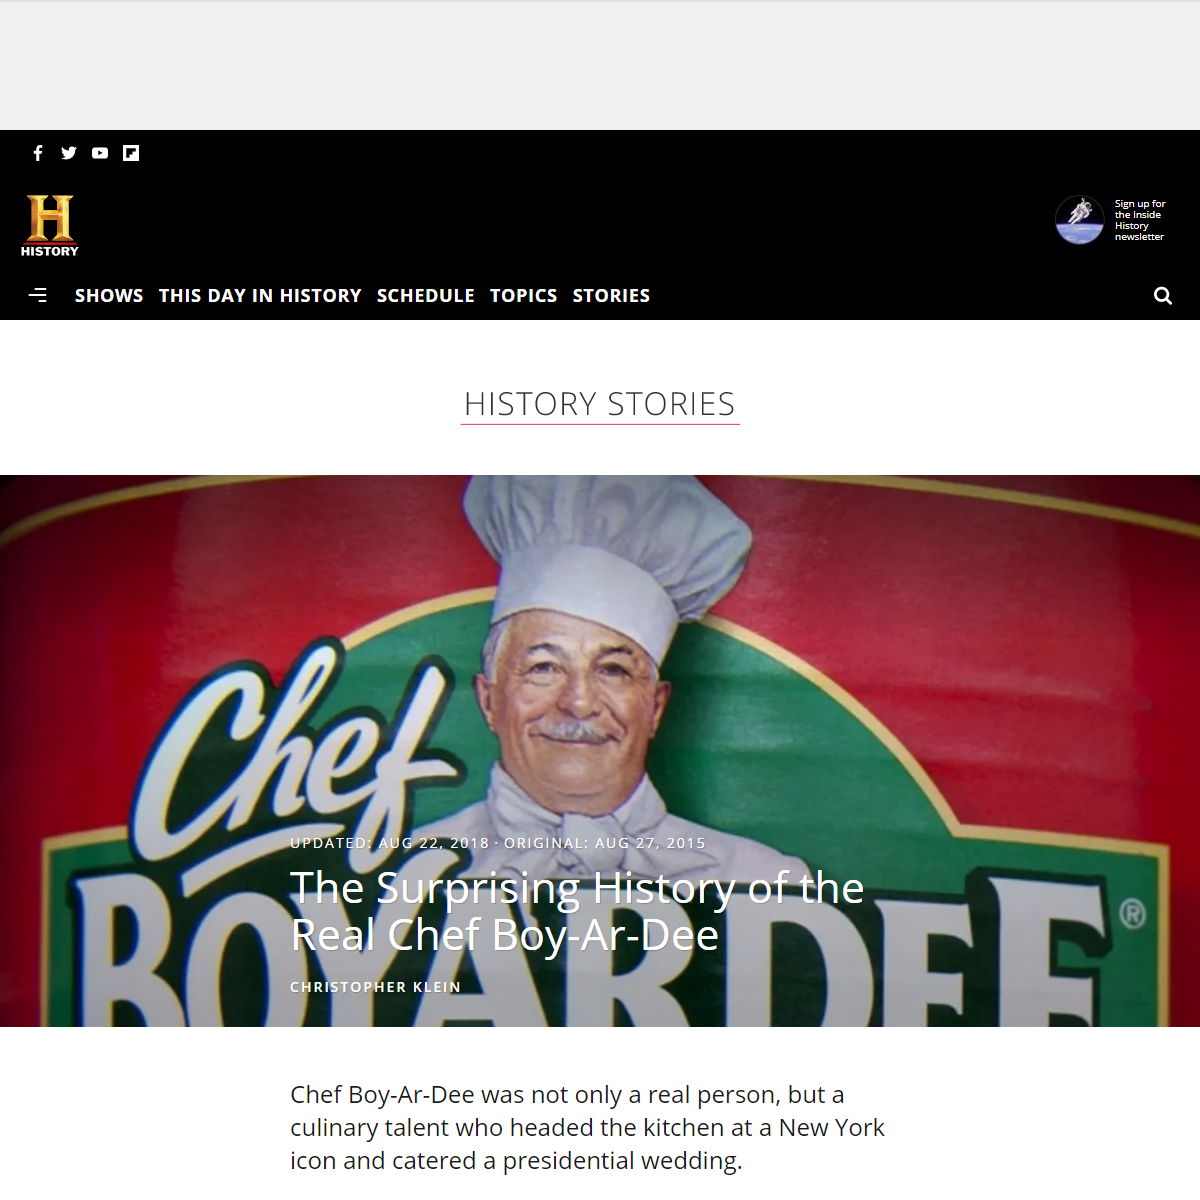 A complete backup of https://www.history.com/news/the-surprising-history-of-the-real-chef-boy-ar-dee